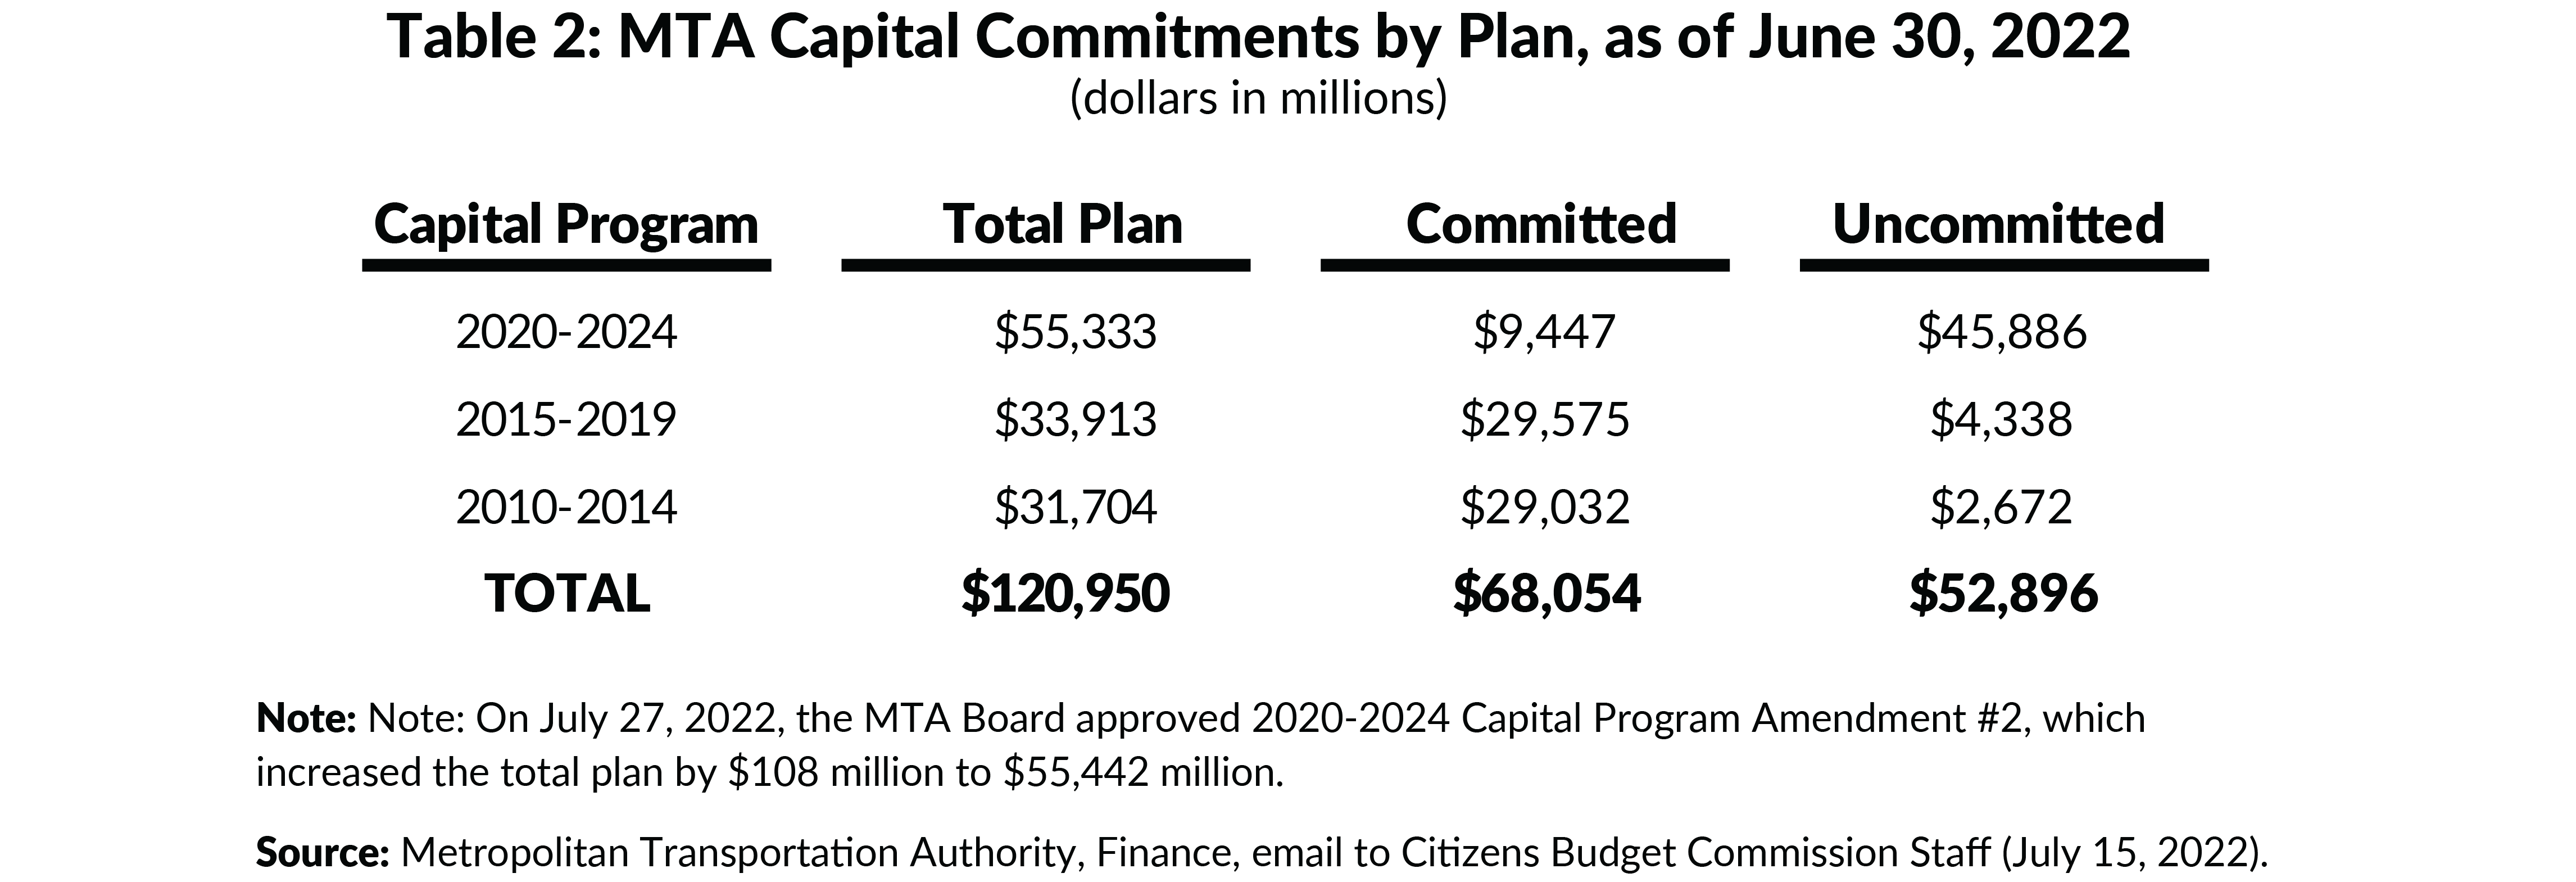 Table 2: MTA Capital Commitments by Plan, as of June 30, 2022 